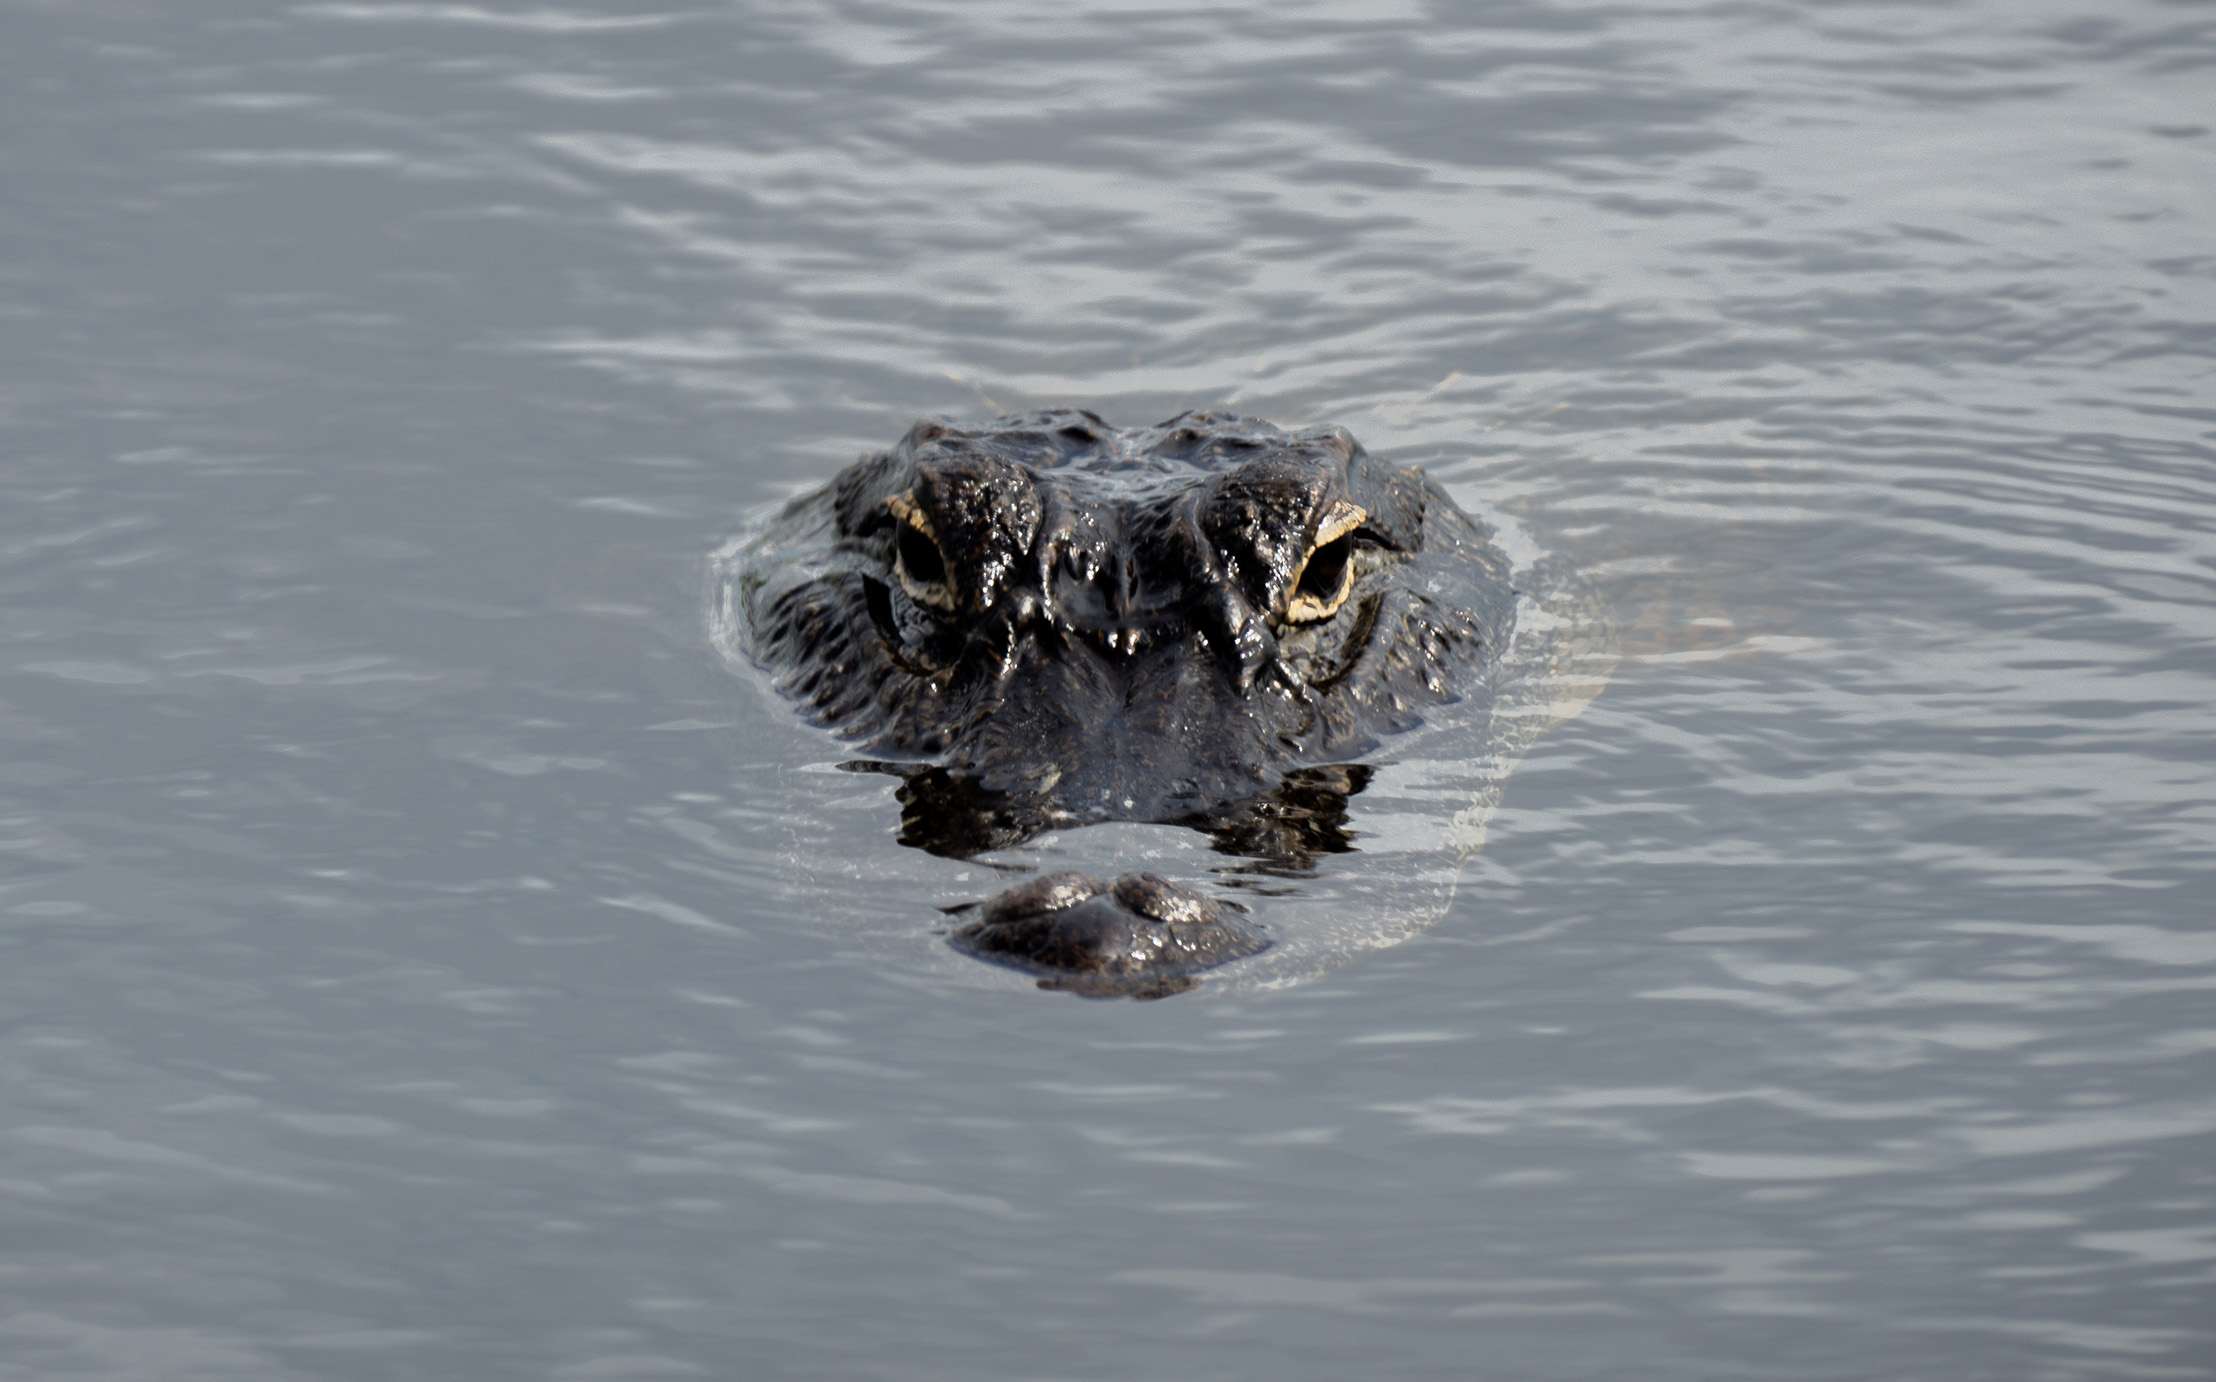 Alligator face peaking above the water